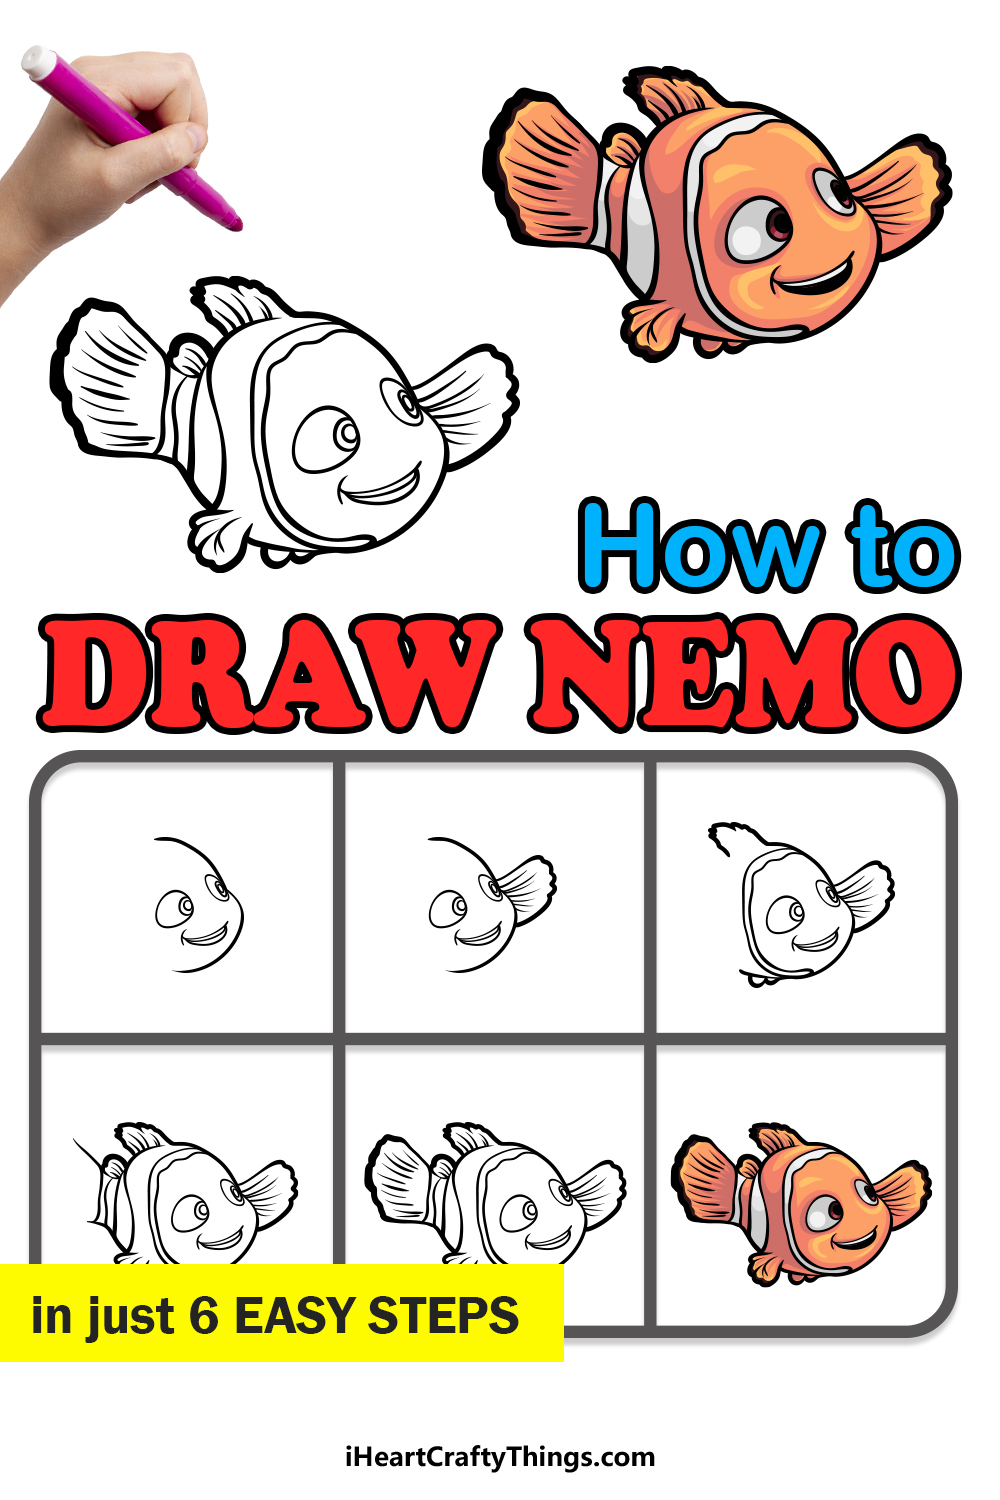 How to draw Nemo in 6 easy steps